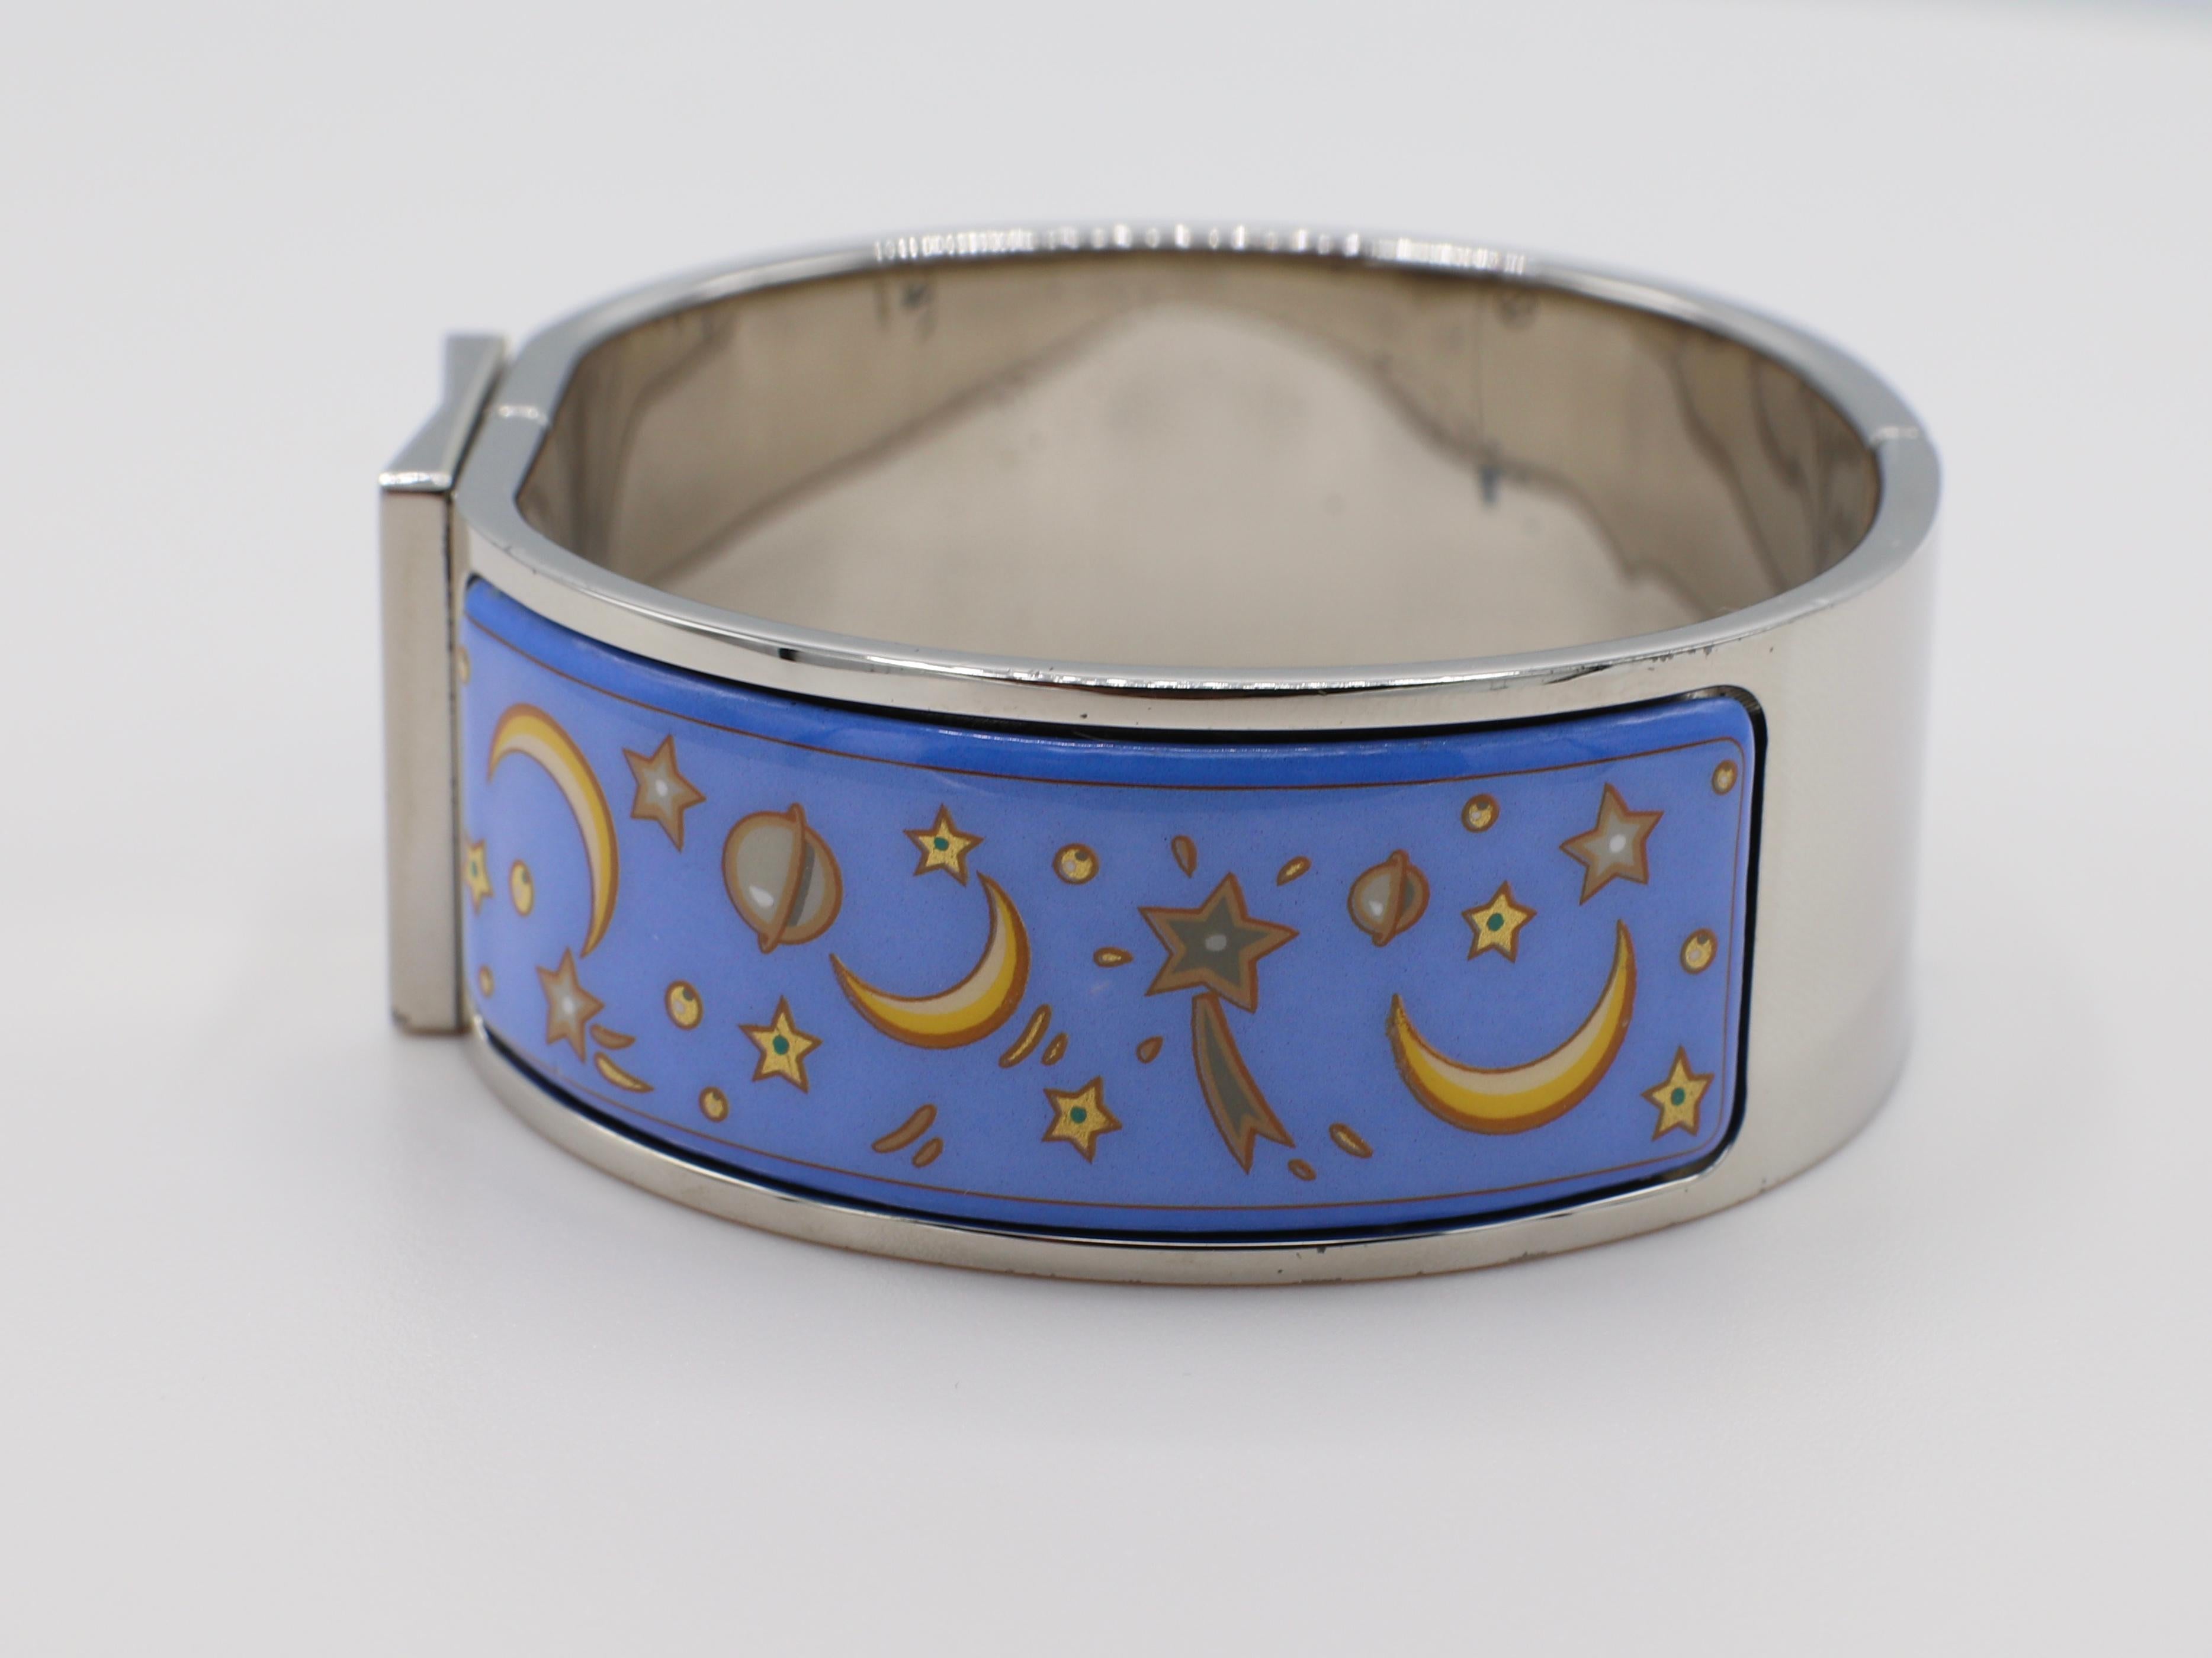 Hermes Clic Clac Enamel Bracelet Moon & Stars 

Diameter: 2.44 inches
Width: .78 inches 
Weight: 60.9 grams 